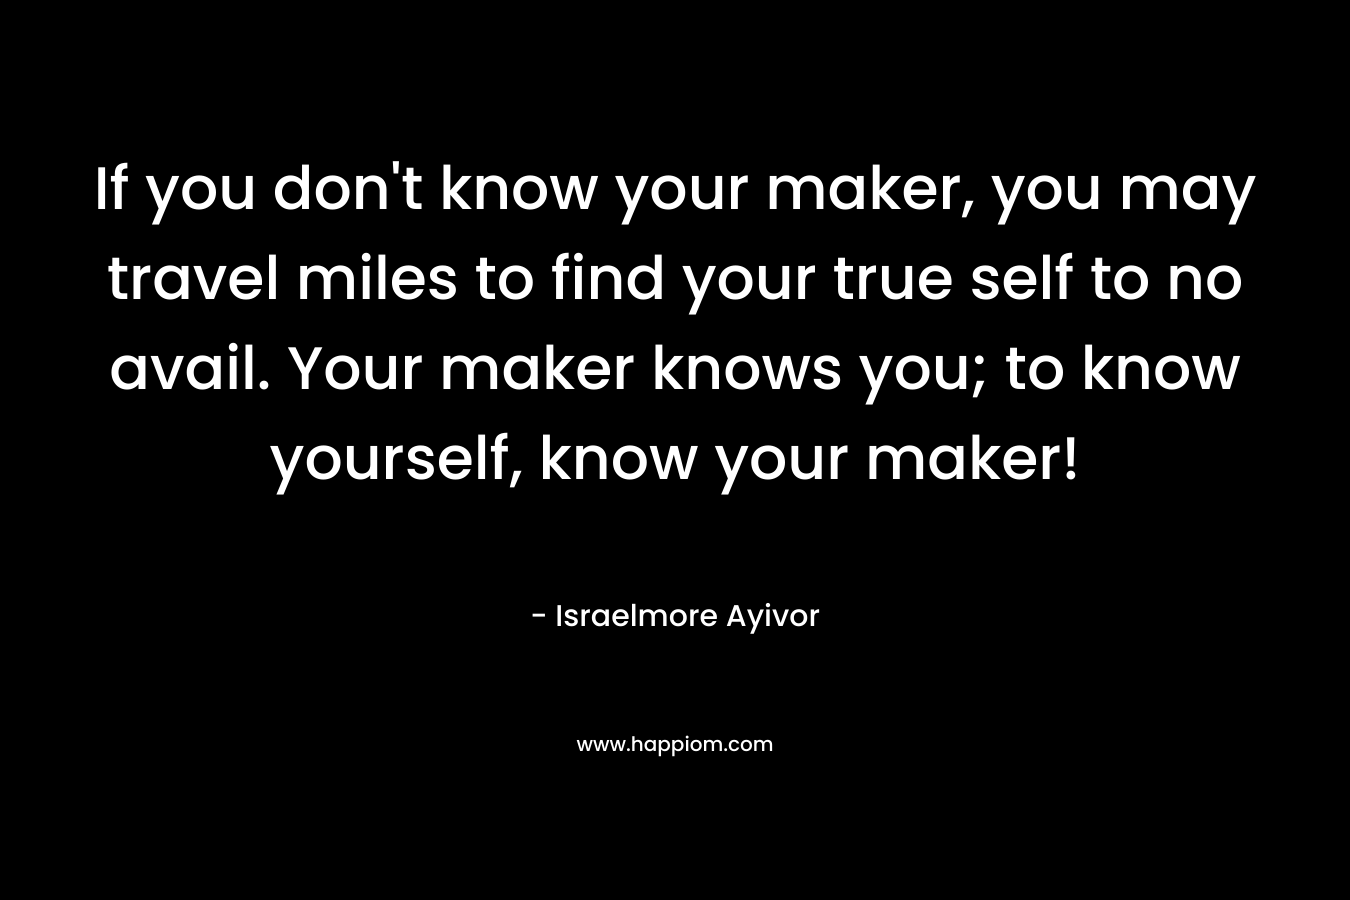 If you don’t know your maker, you may travel miles to find your true self to no avail. Your maker knows you; to know yourself, know your maker! – Israelmore Ayivor